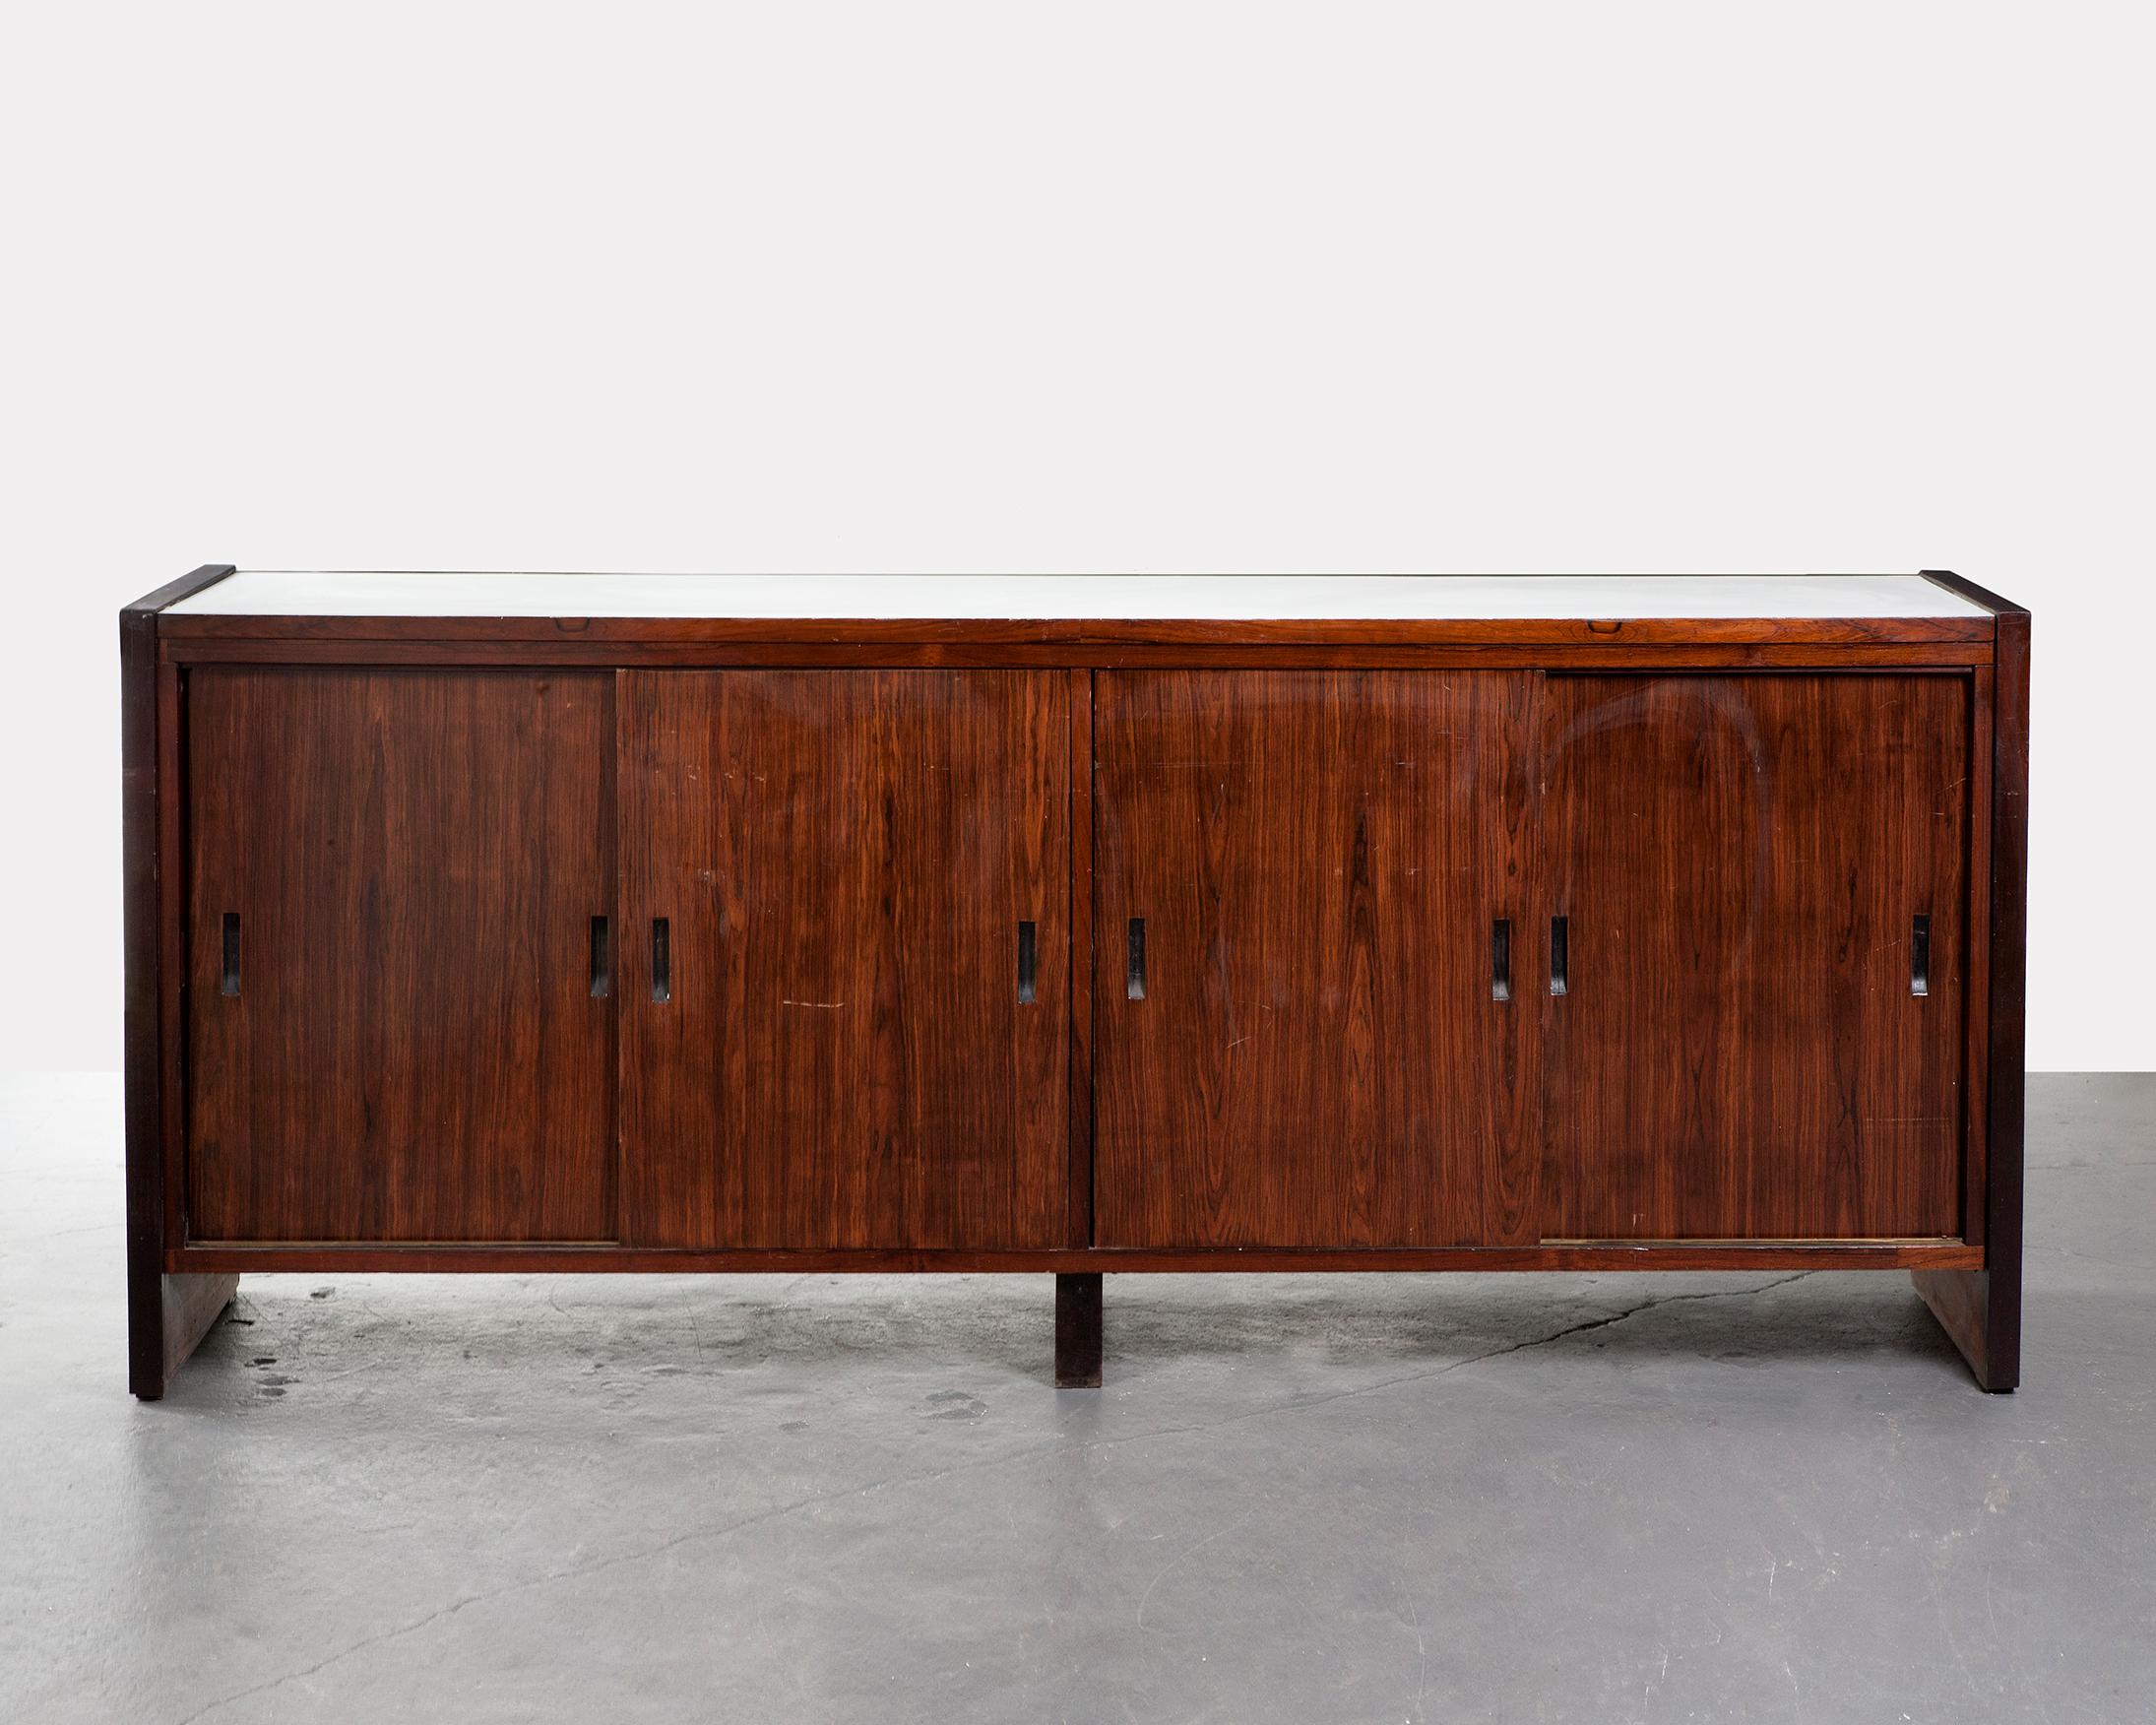 Four-door credenza in rosewood with white formica top and sides, Brazil, 1960s.